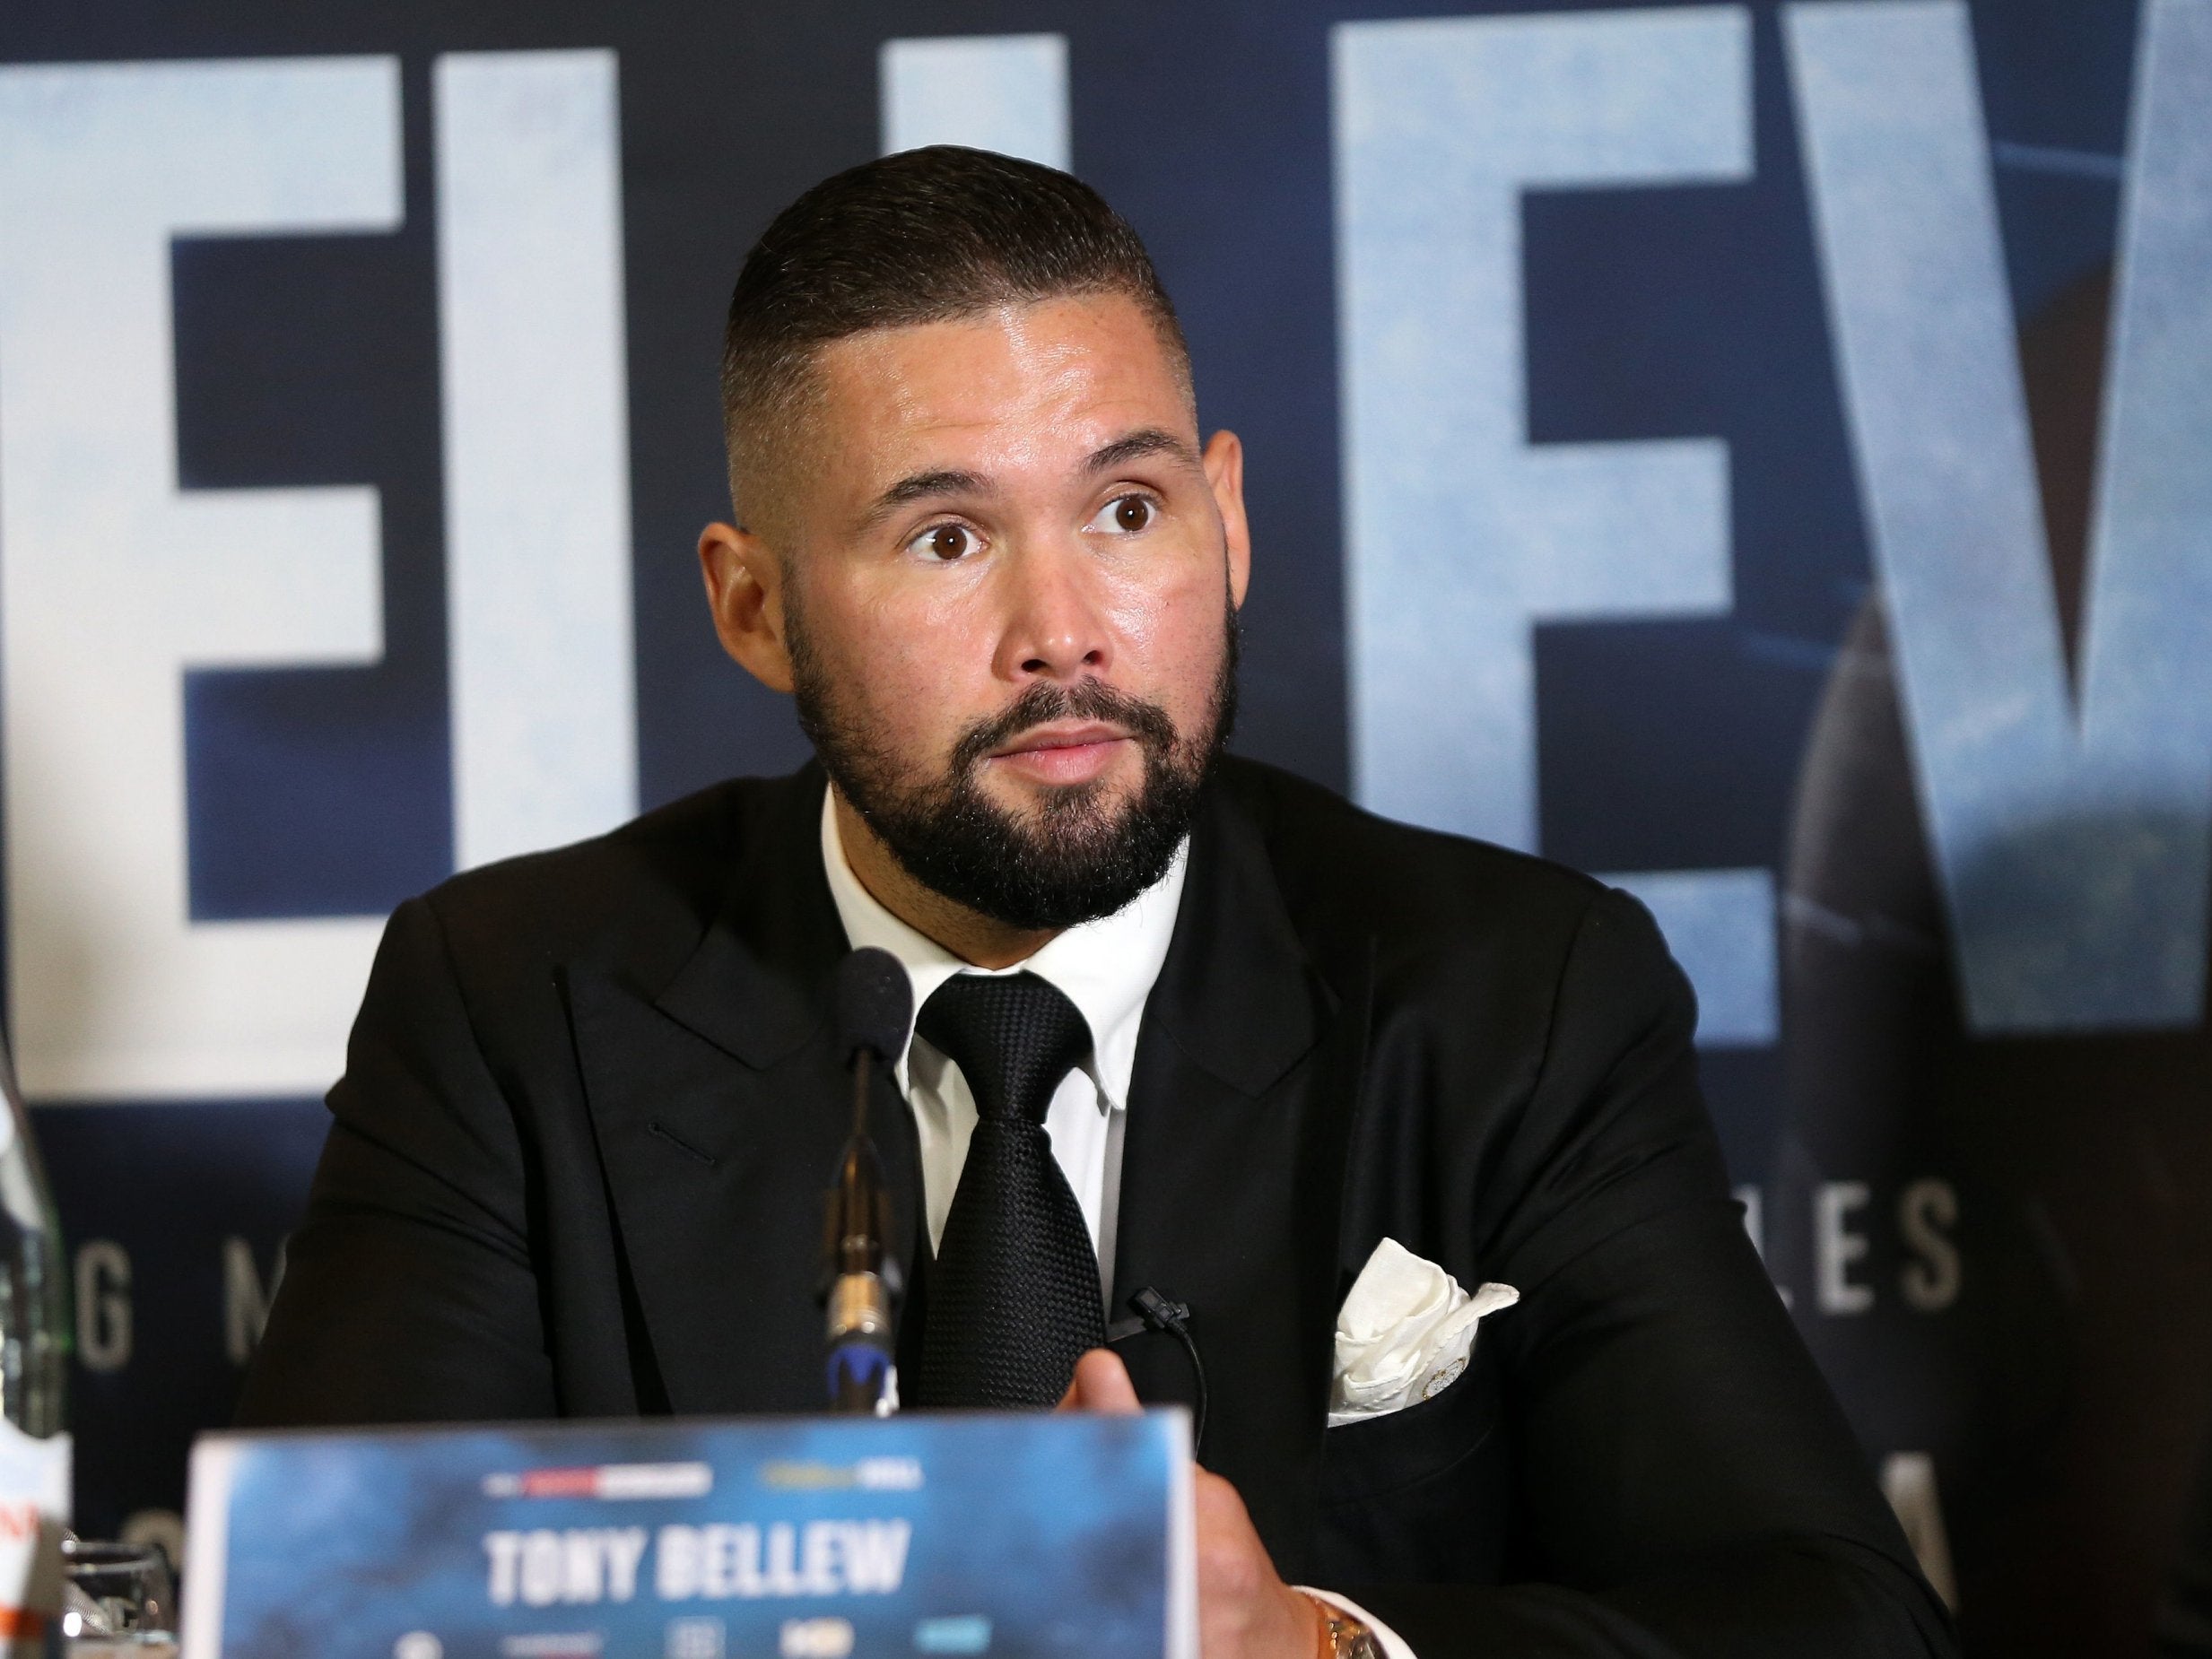 Bellew is outspoken on the subject of drugs in boxing